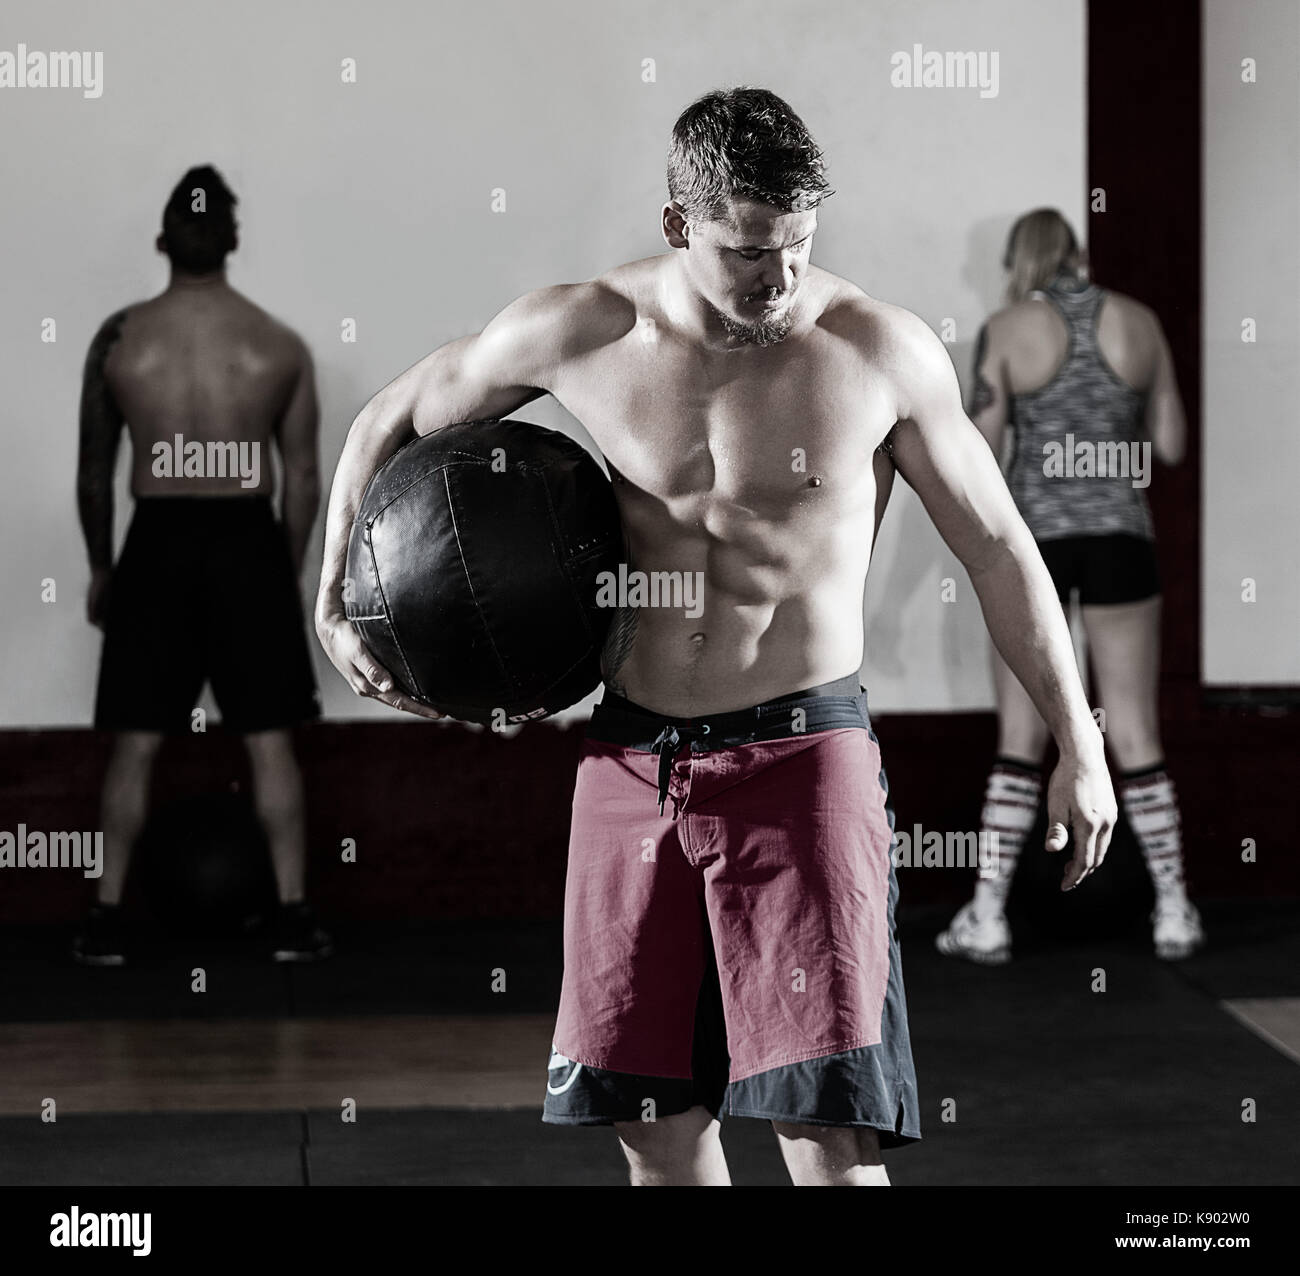 Shirtless man holding medicine ball in gym Banque D'Images